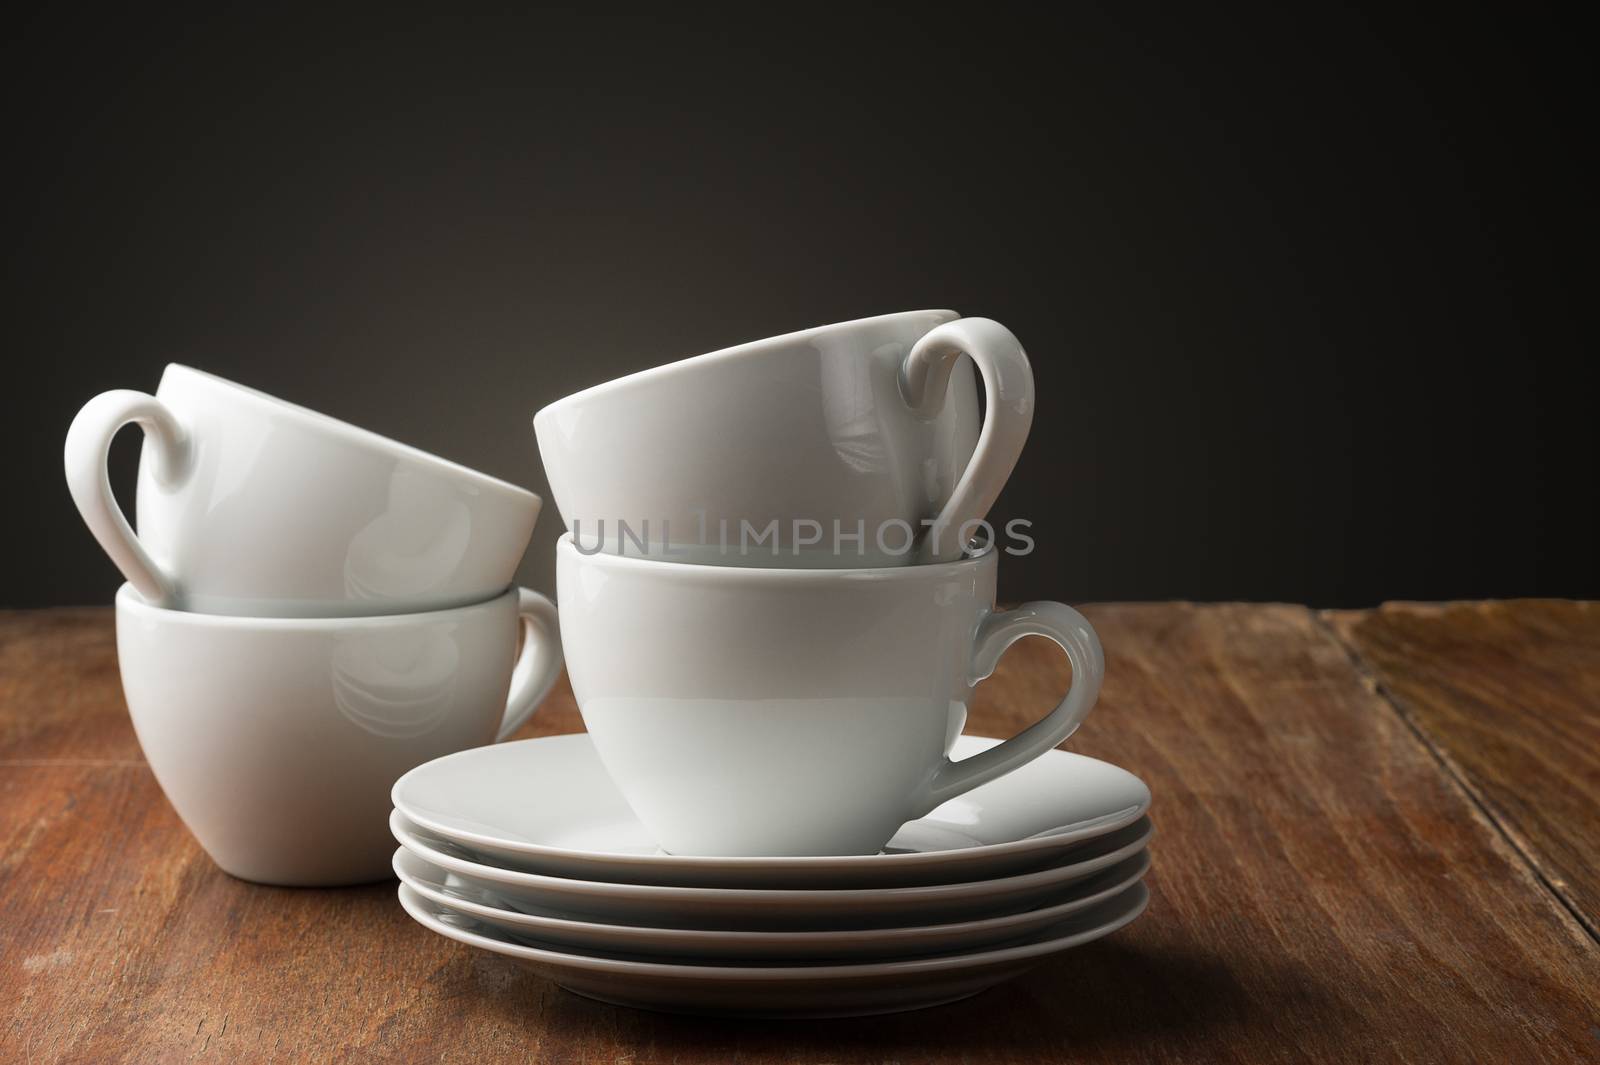 Four plain white ceramic coffee cups by MOELLERTHOMSEN